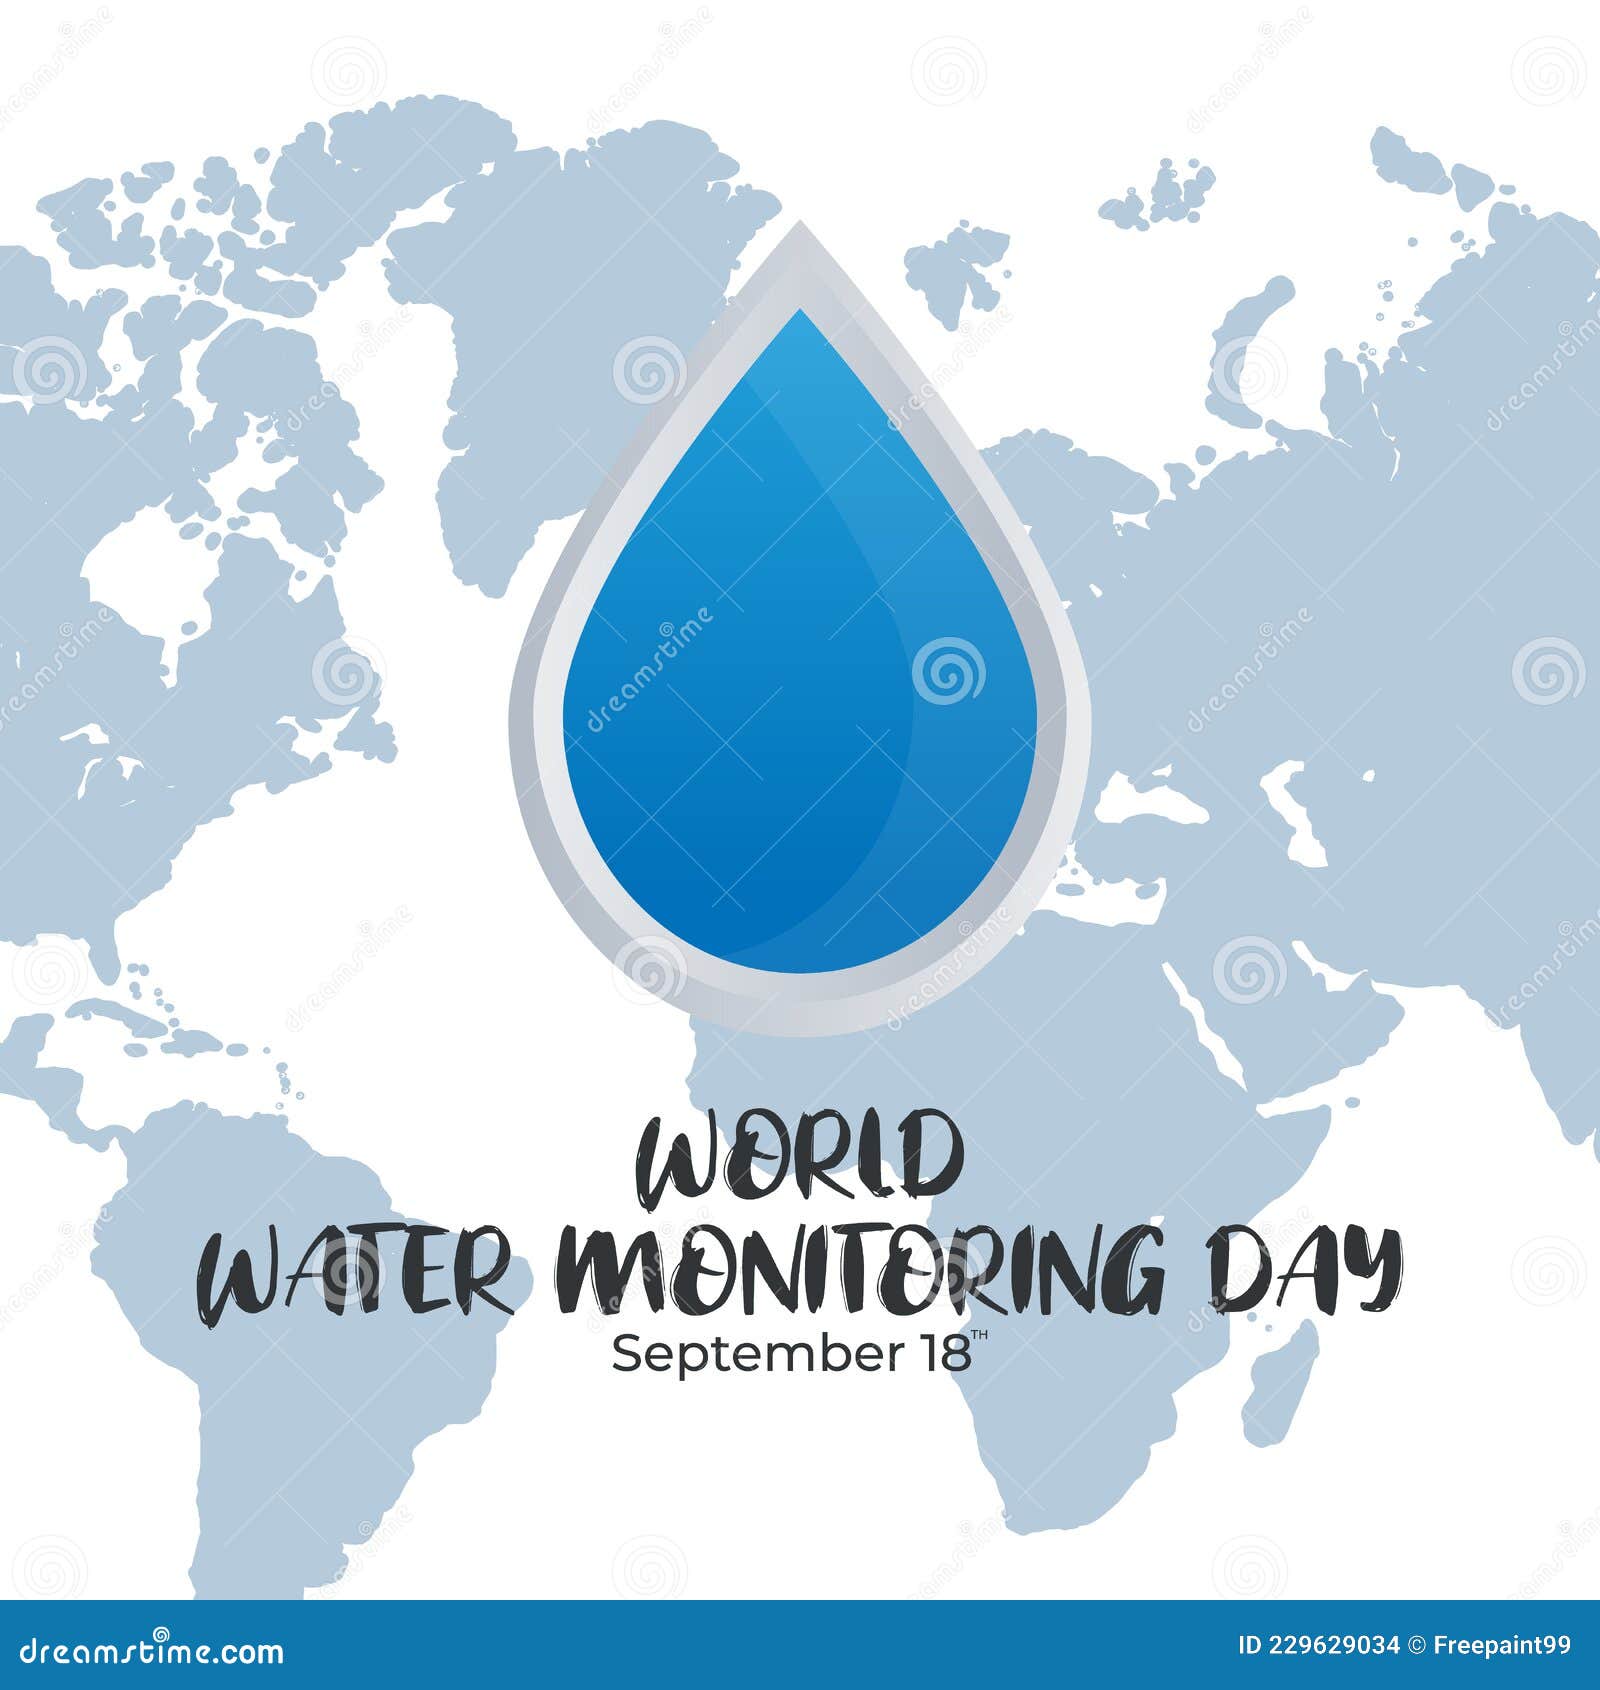 Flat Design Illustration of World Water Monitoring Day Template